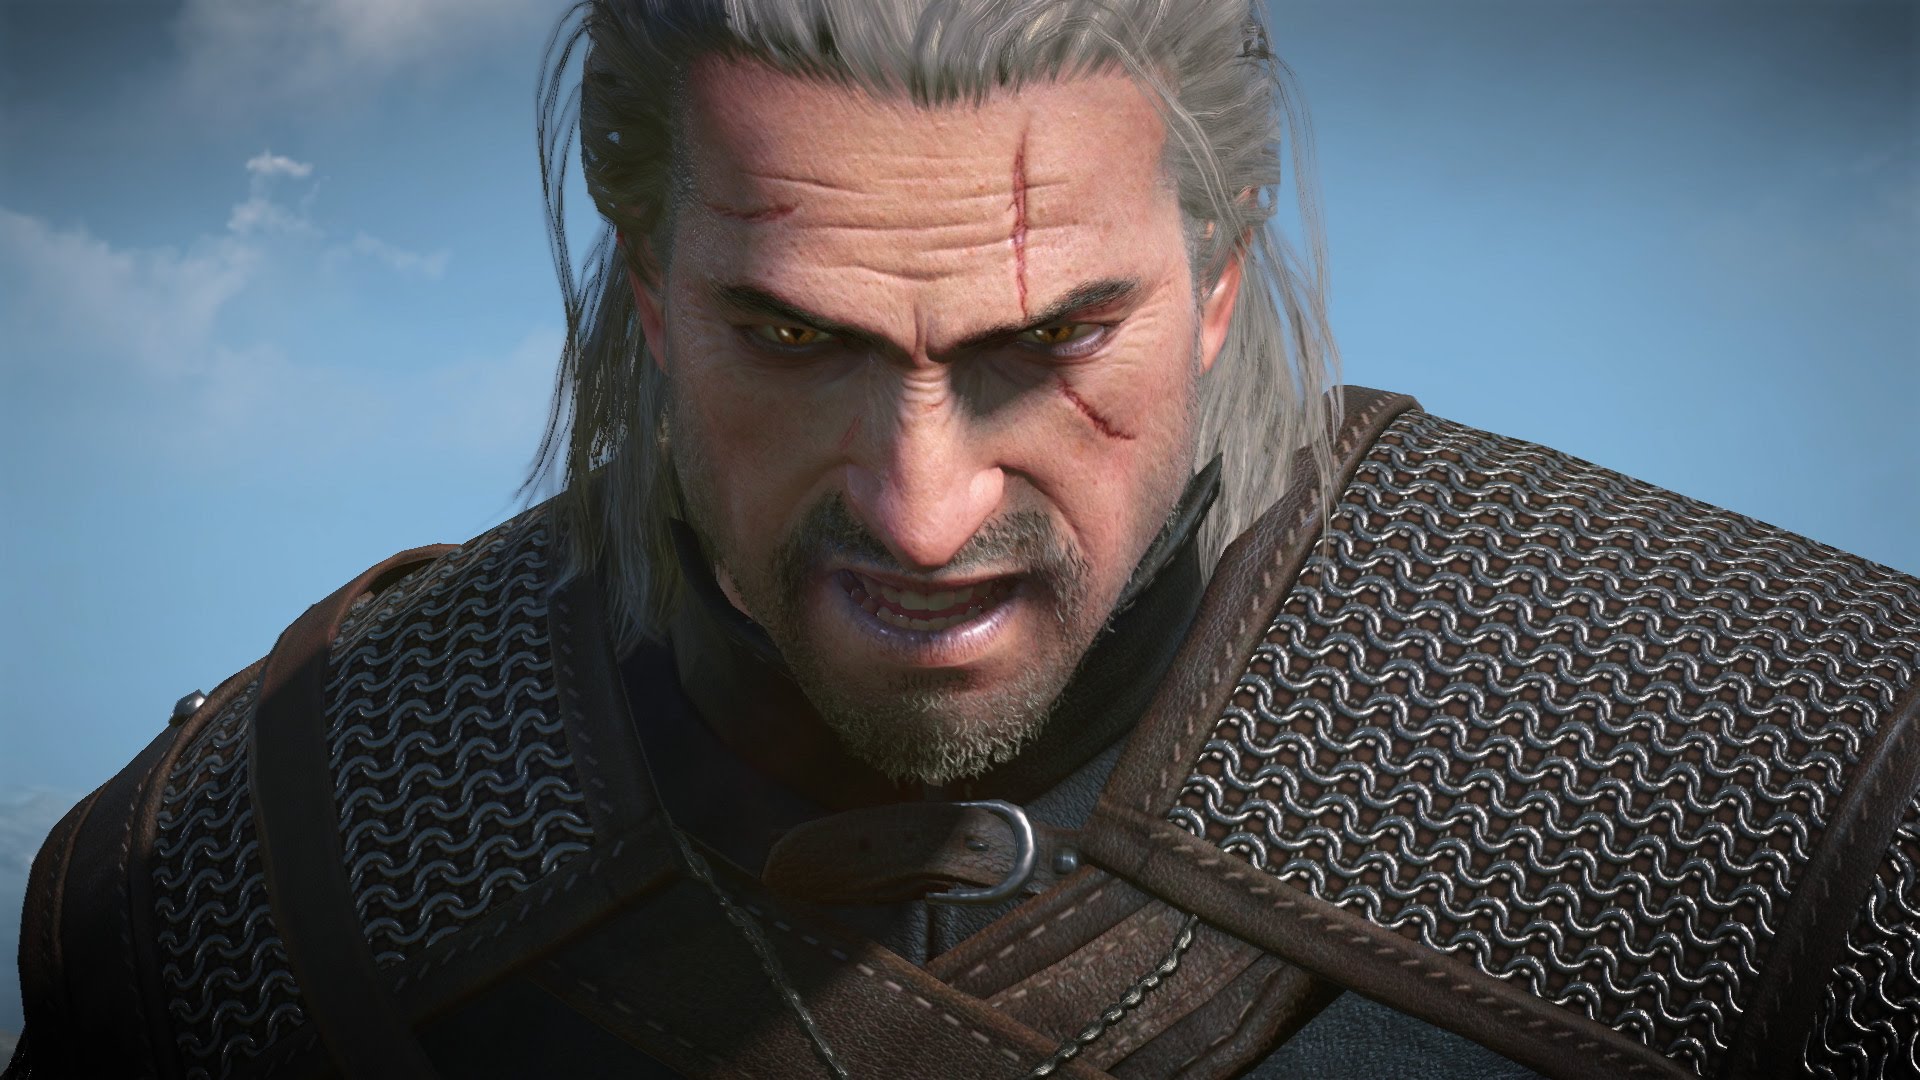 The Witcher 3: Wild Hunt - Game Of The Year Edition | Announce trailer